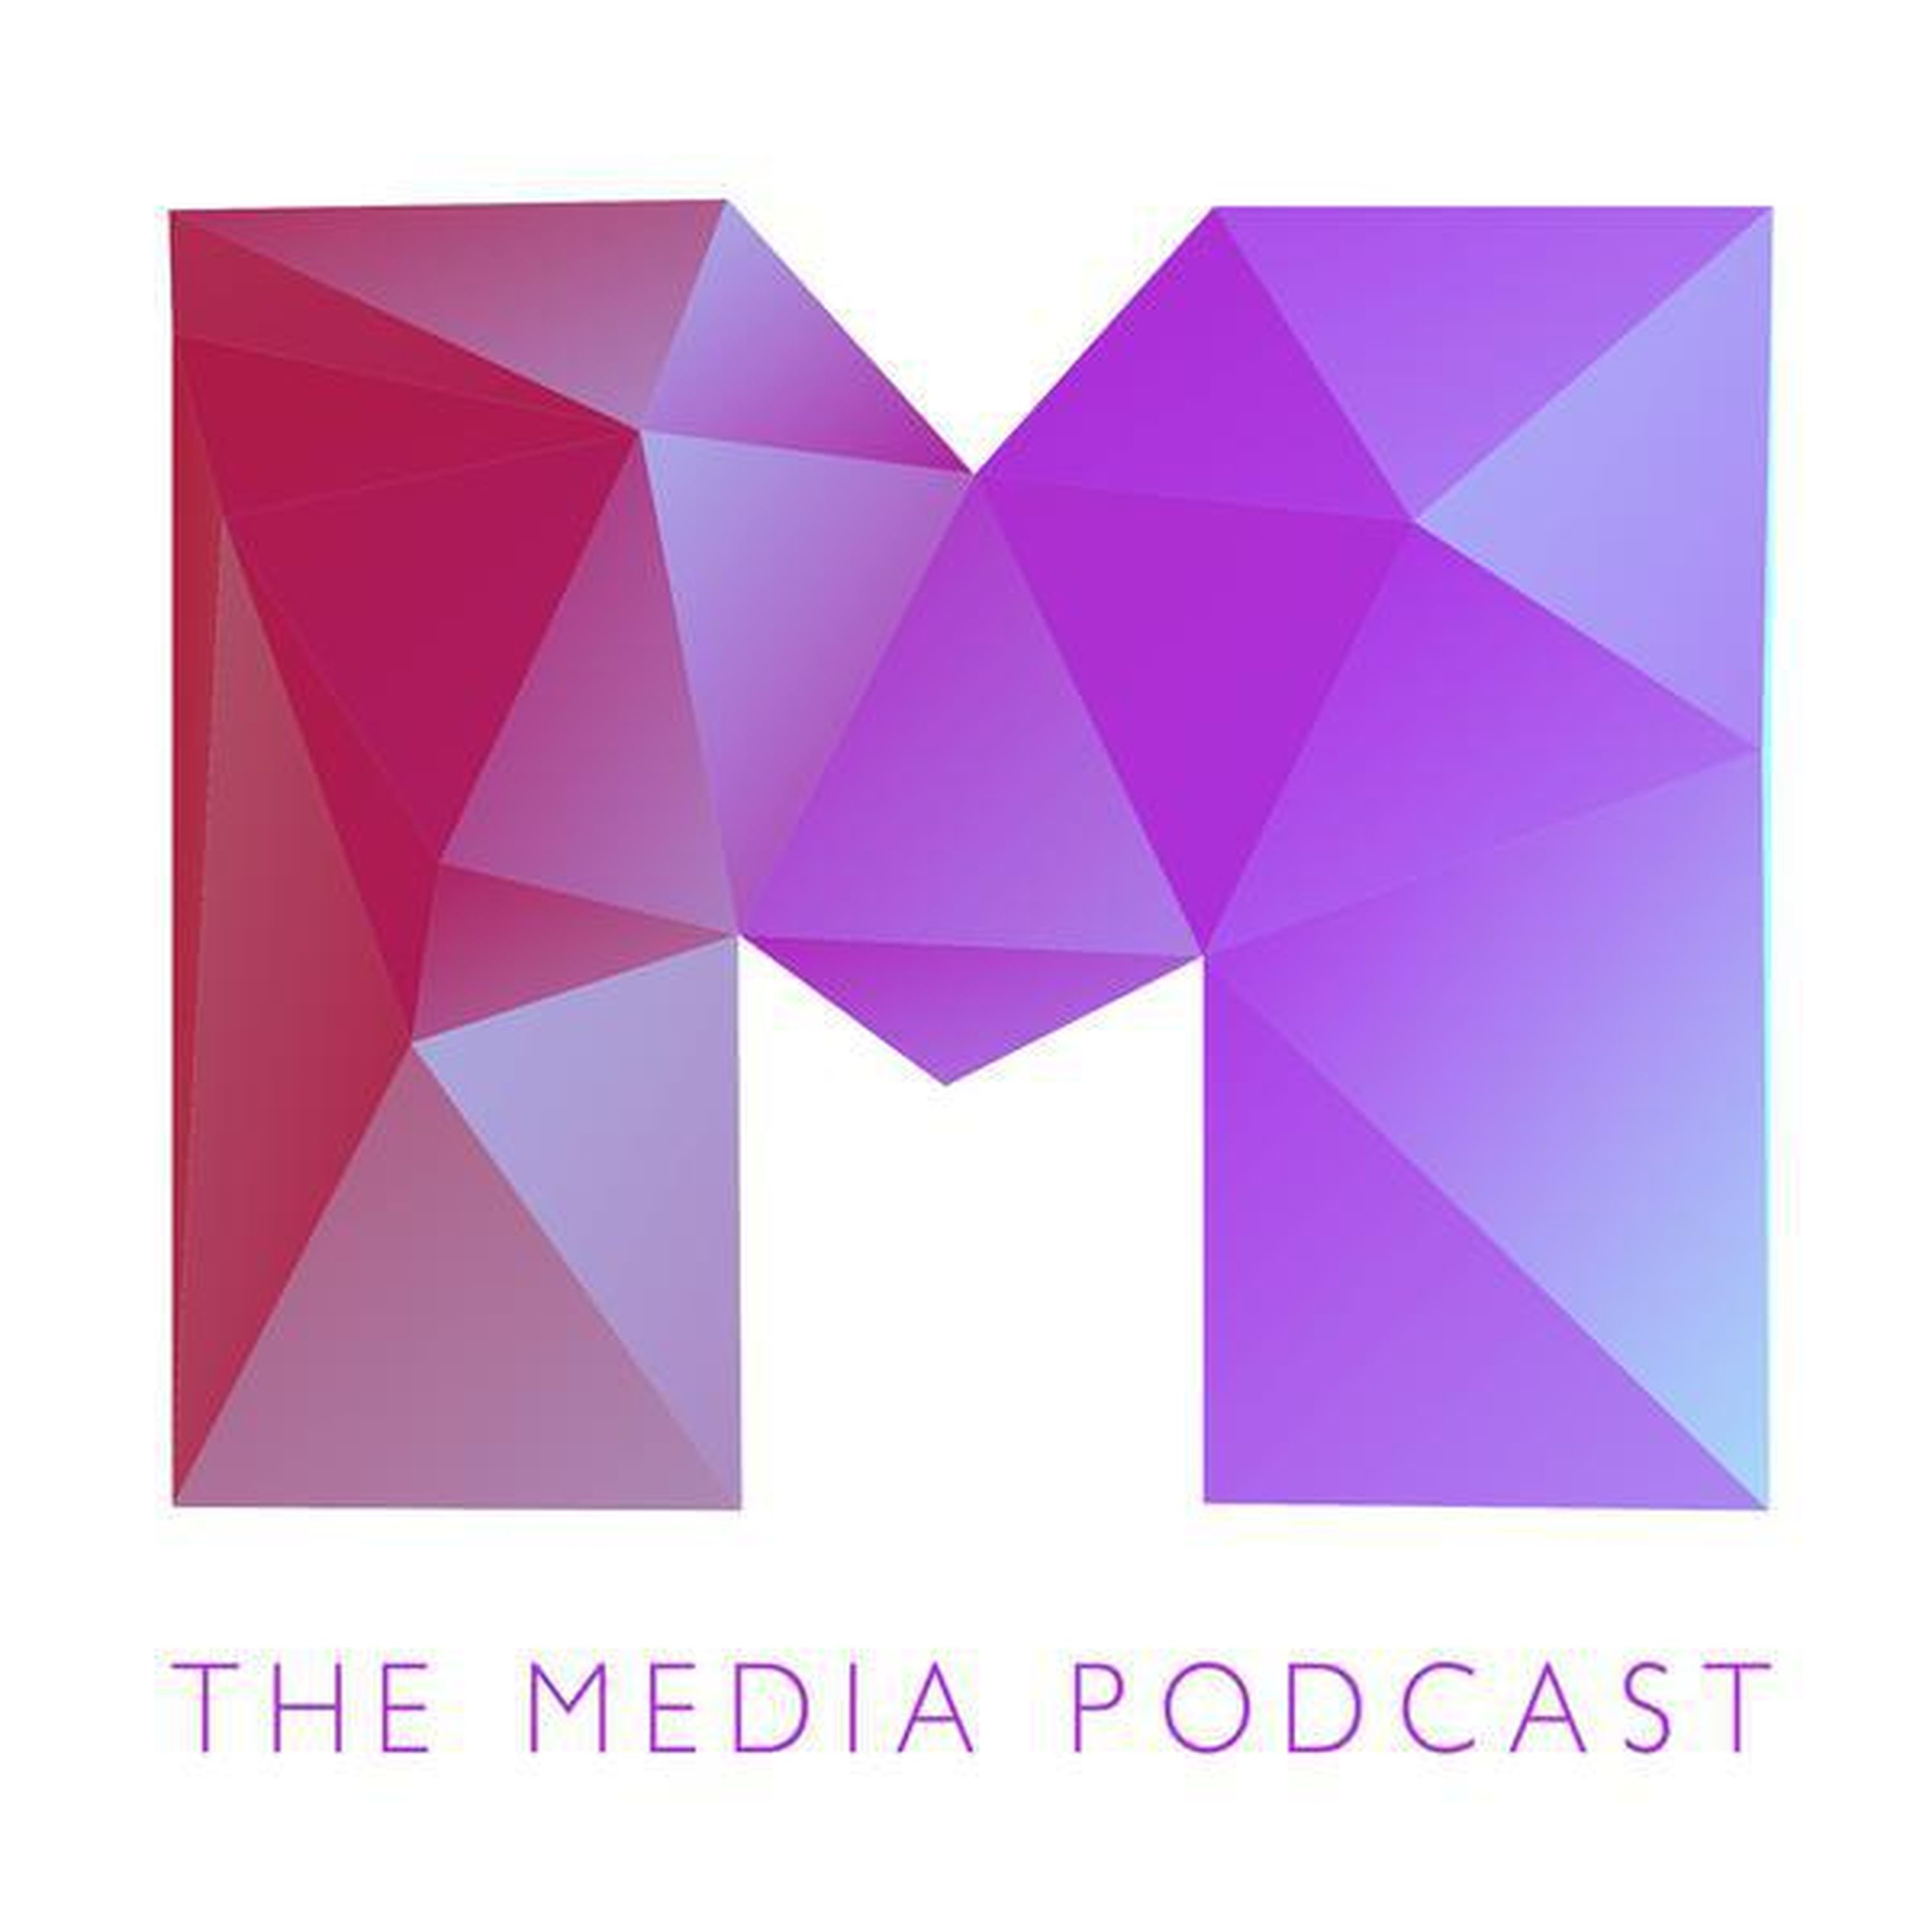 #16 - Radio 1 to launch iPlayer channel, BT wins access to Sky Sports and the TV ads going viral for Christmas - The Media Podcast with Olly Mann